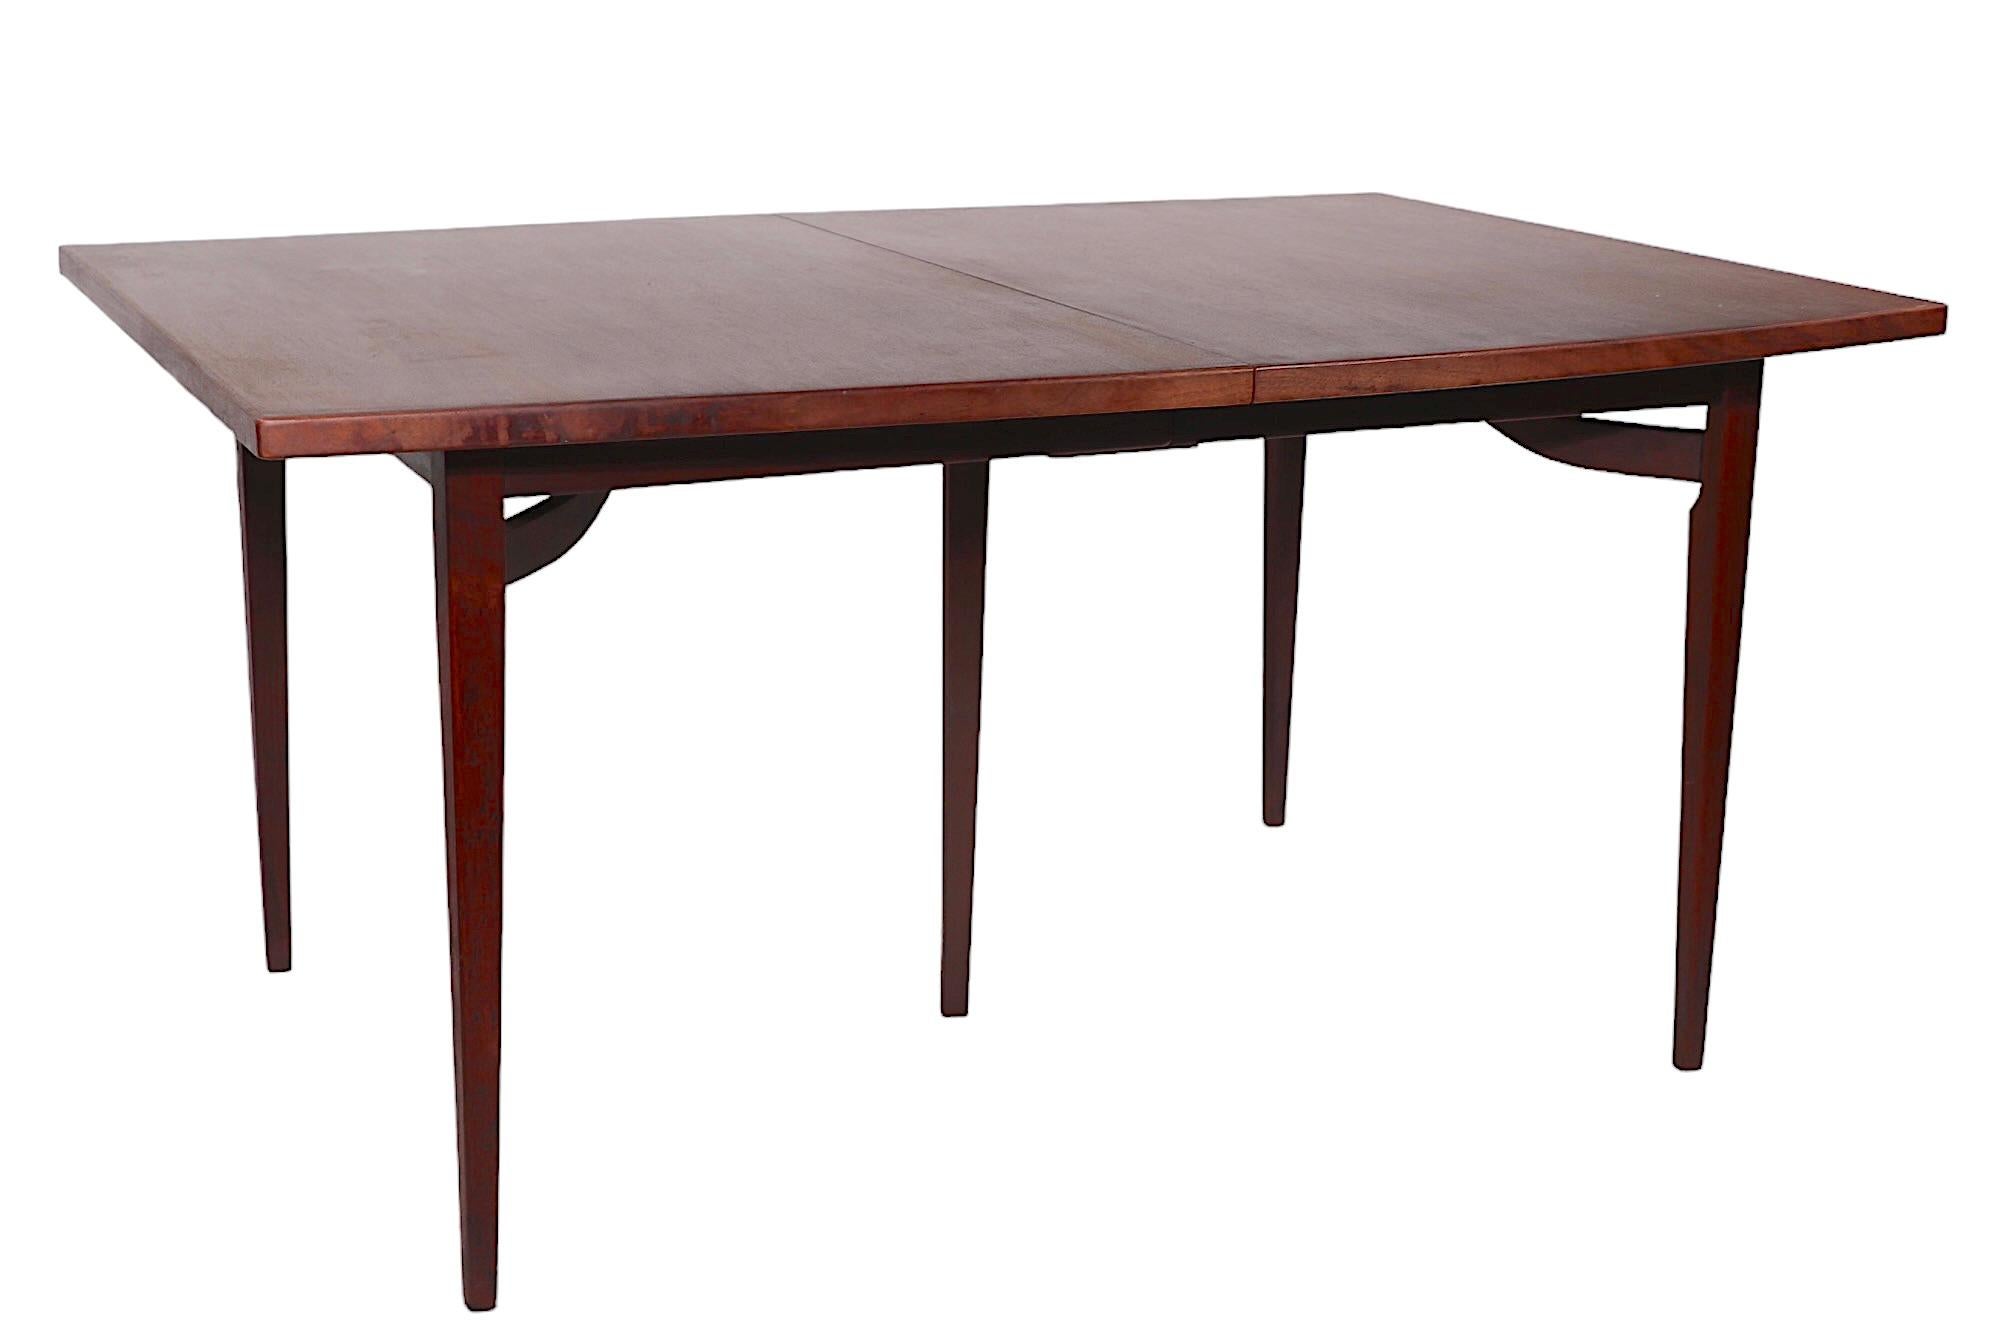 Classic Mid Century boat shaped dining table, design reminiscent of Jens Risom, Paul McCobb etc, unsigned. The table is in very good, original, clean and ready to use condition, showing only light cosmetic wear, normal and consistent with age.